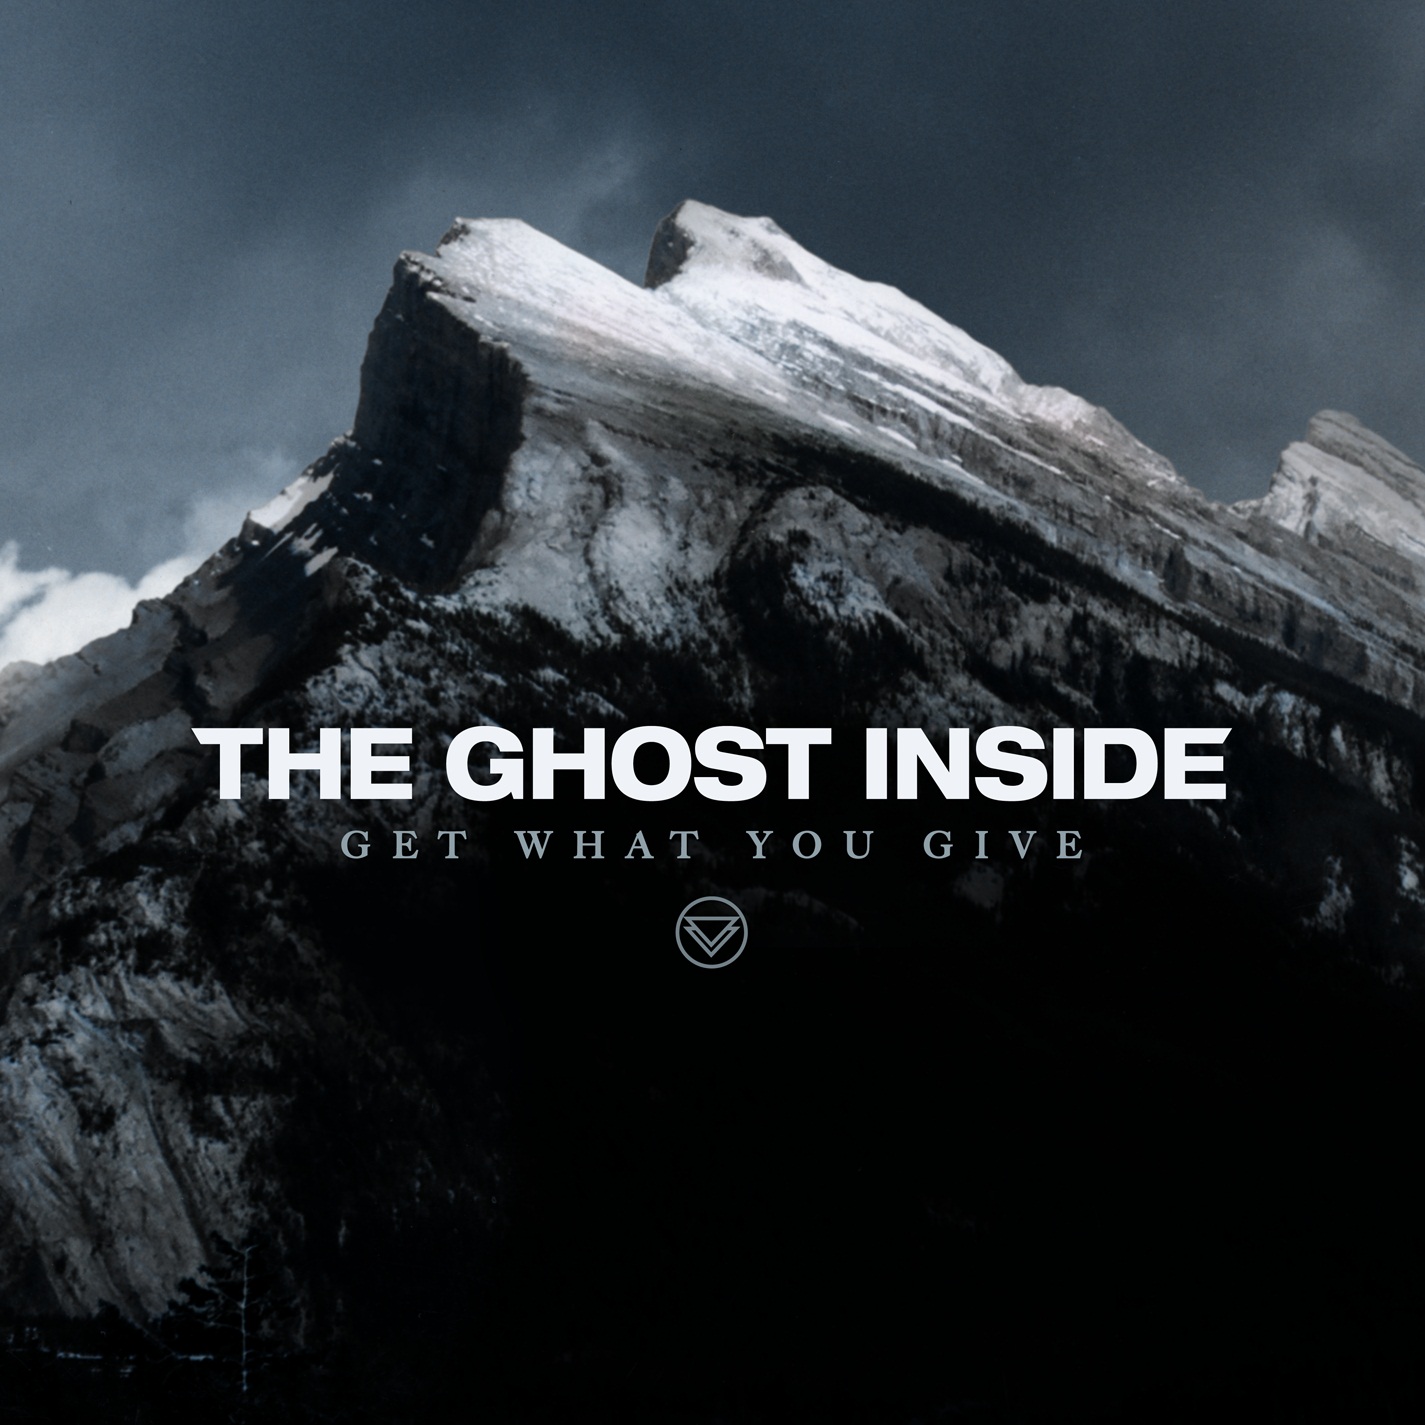 The Ghost Inside to release new album on June 18th